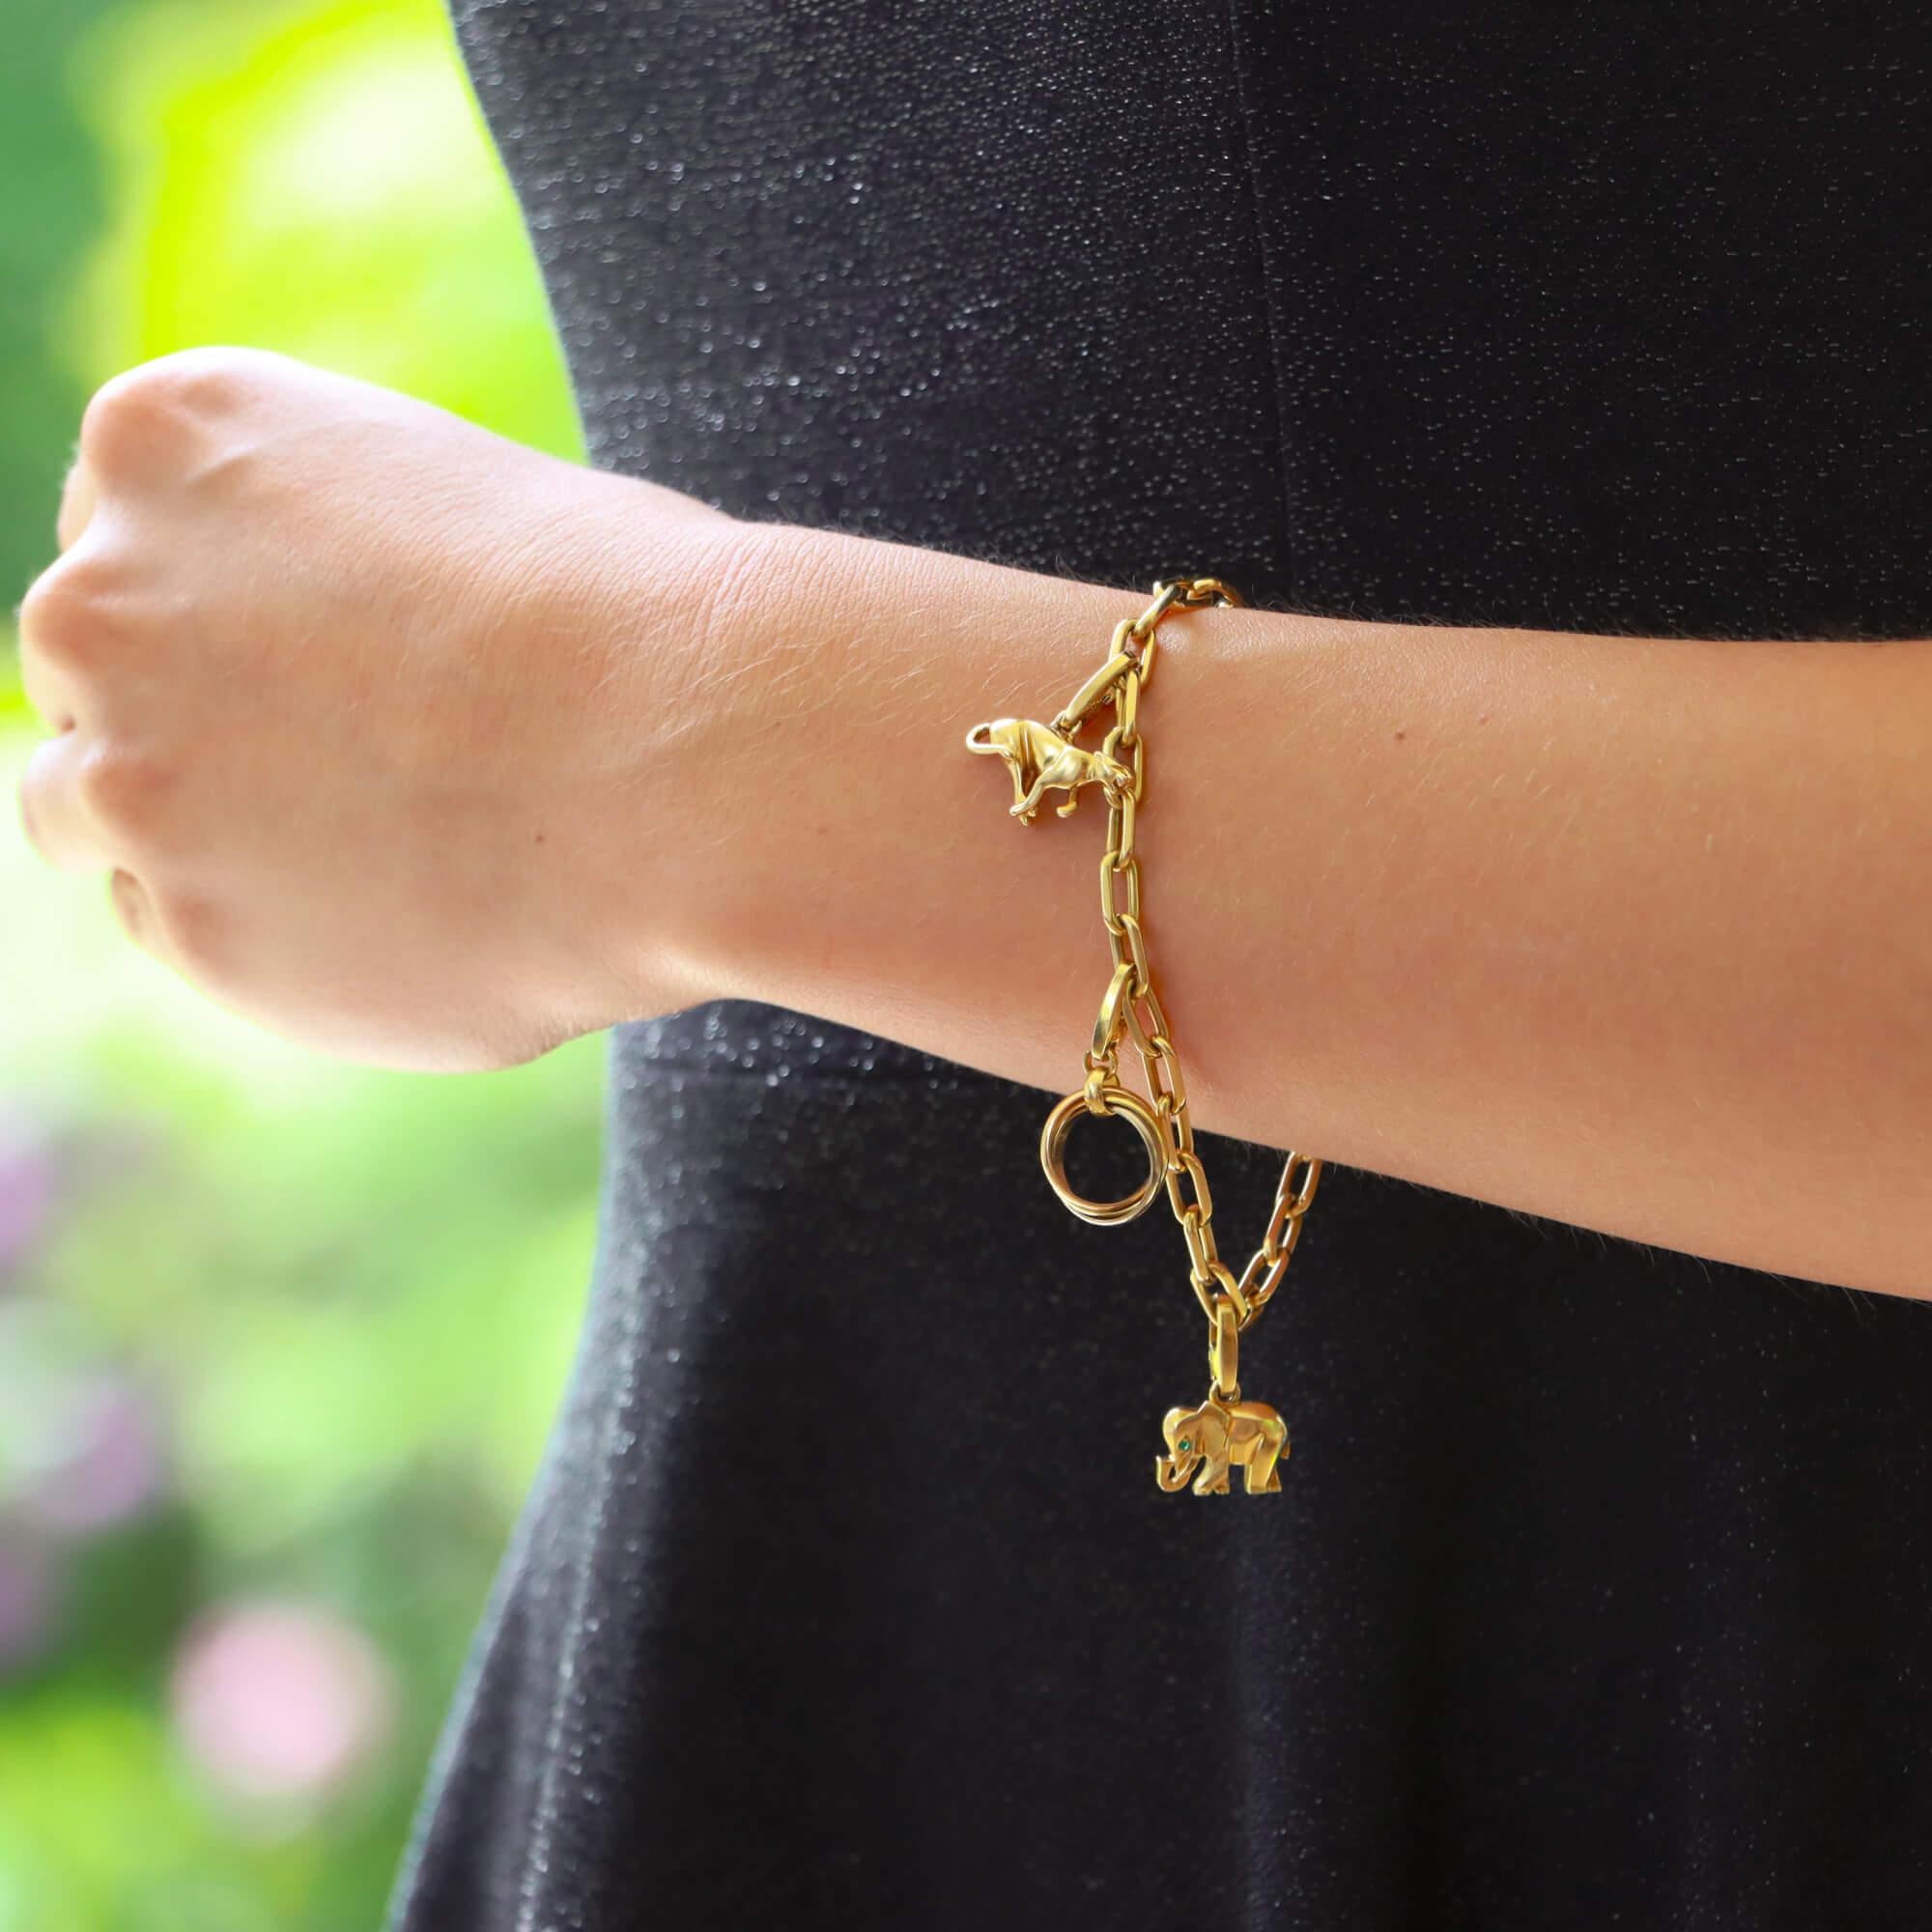 A beautiful vintage Cartier charm bracelet set in 18k yellow gold.

The piece is firstly composed of an elegant link bracelet, fastened with a secure lobster clasp with the Cartier logo stamped to one side. From this link bracelet hangs four